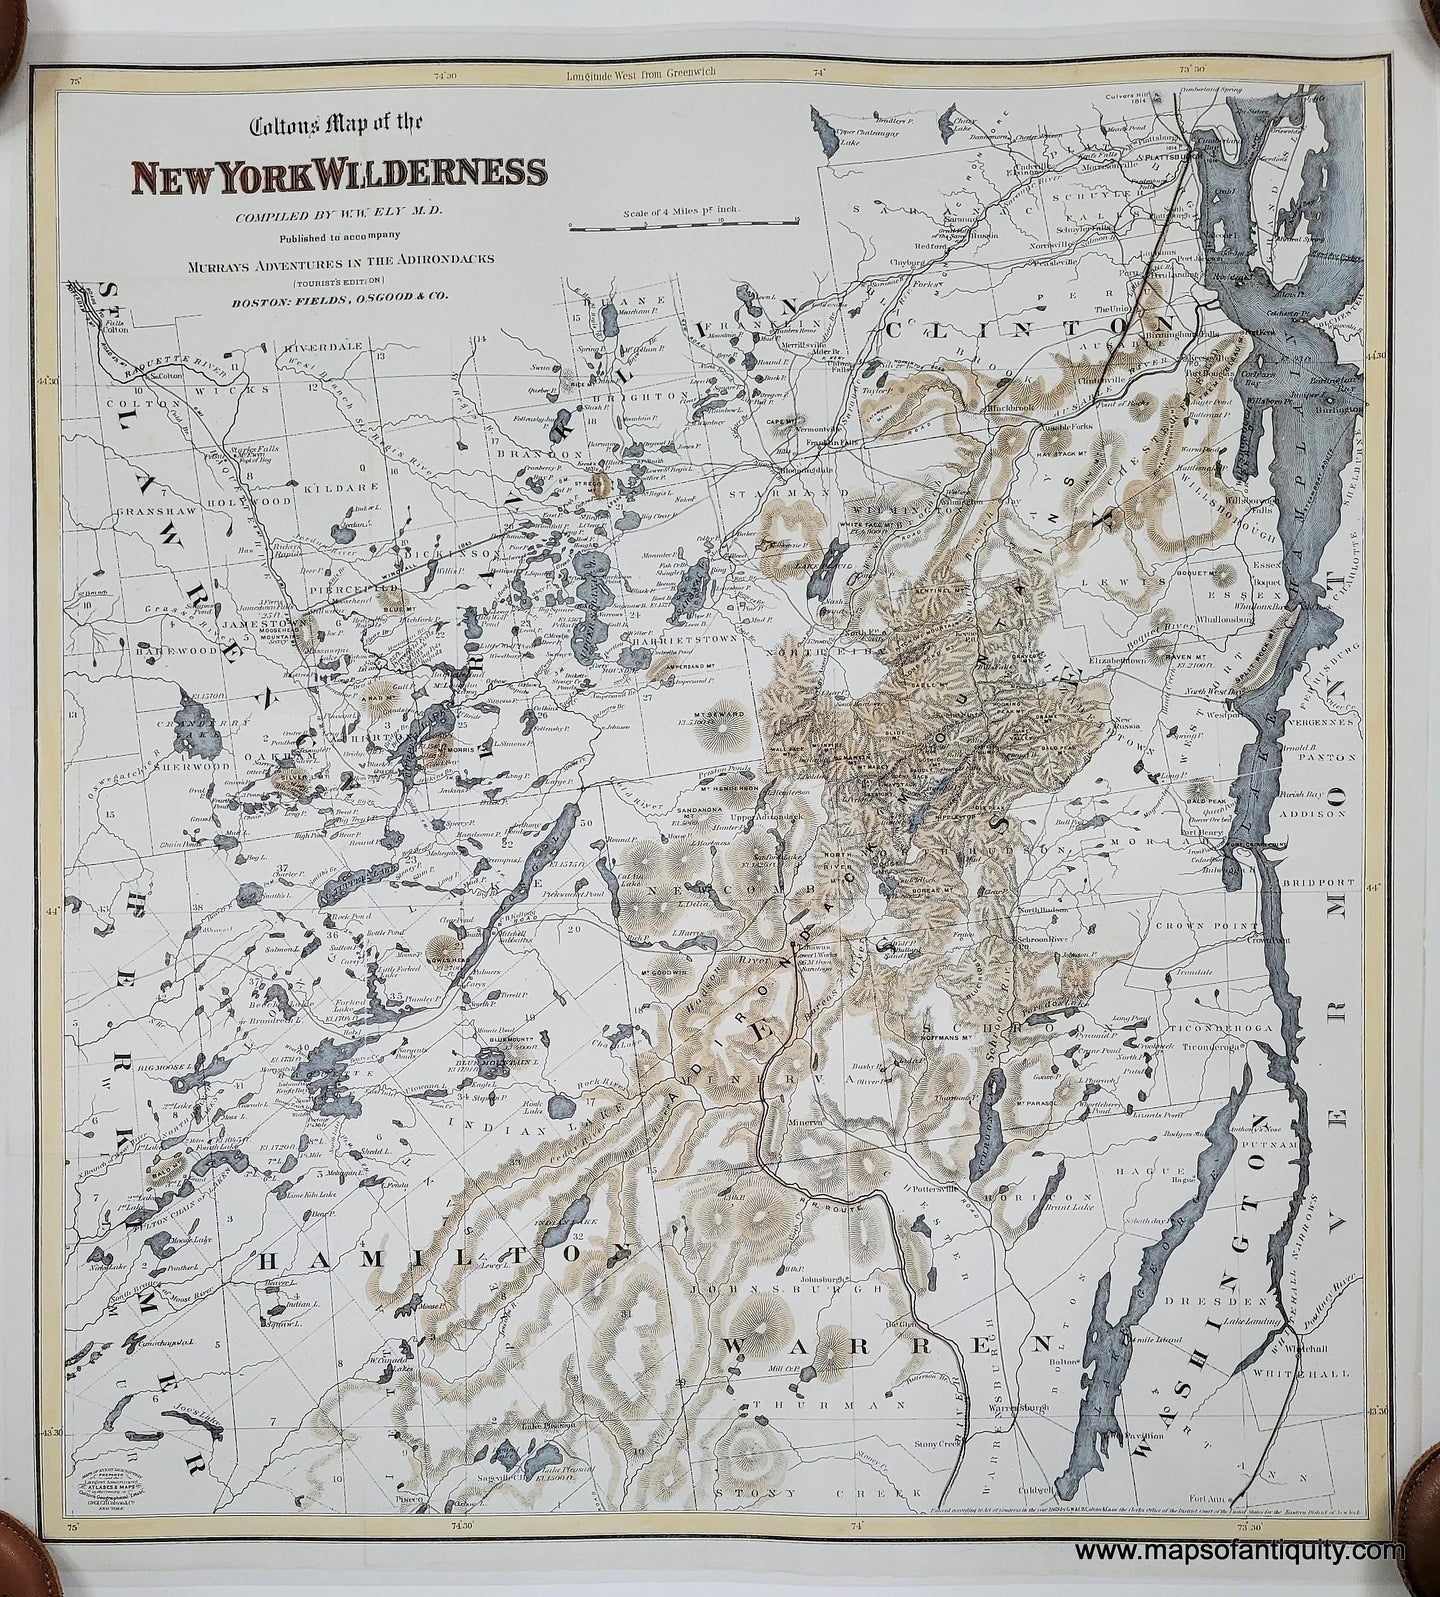 Reproduction-Coltons-Map-of-the-New-York-Wilderness---Maps-Of-Antiquity